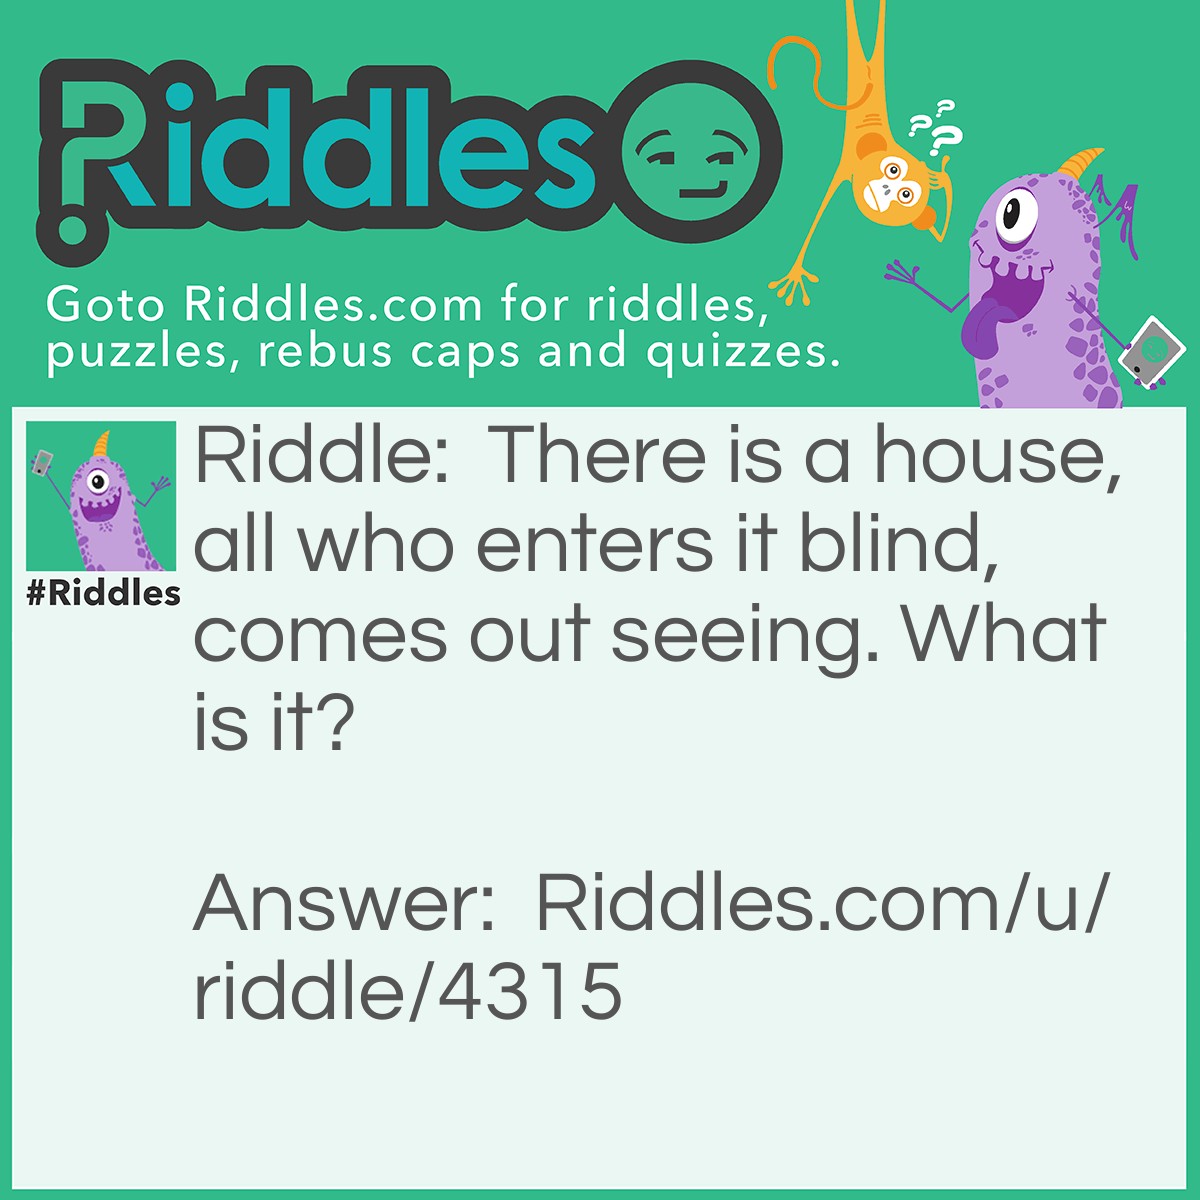 Riddle: There is a house, all who enters it blind, comes out seeing. What is it? Answer: A School.